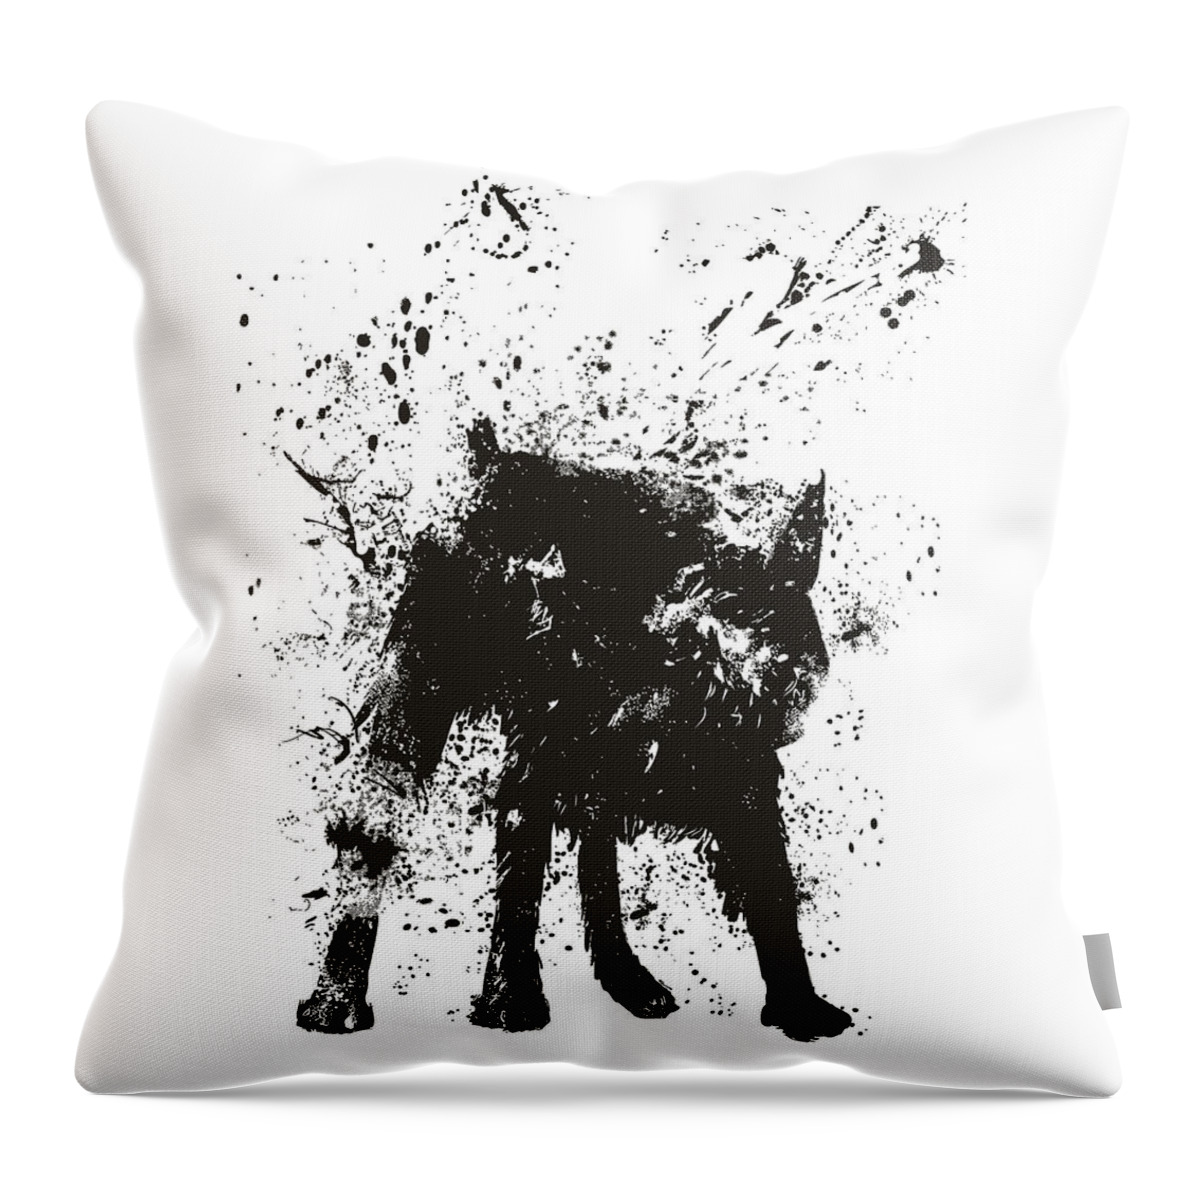 Dog Throw Pillow featuring the painting Wet dog by Balazs Solti